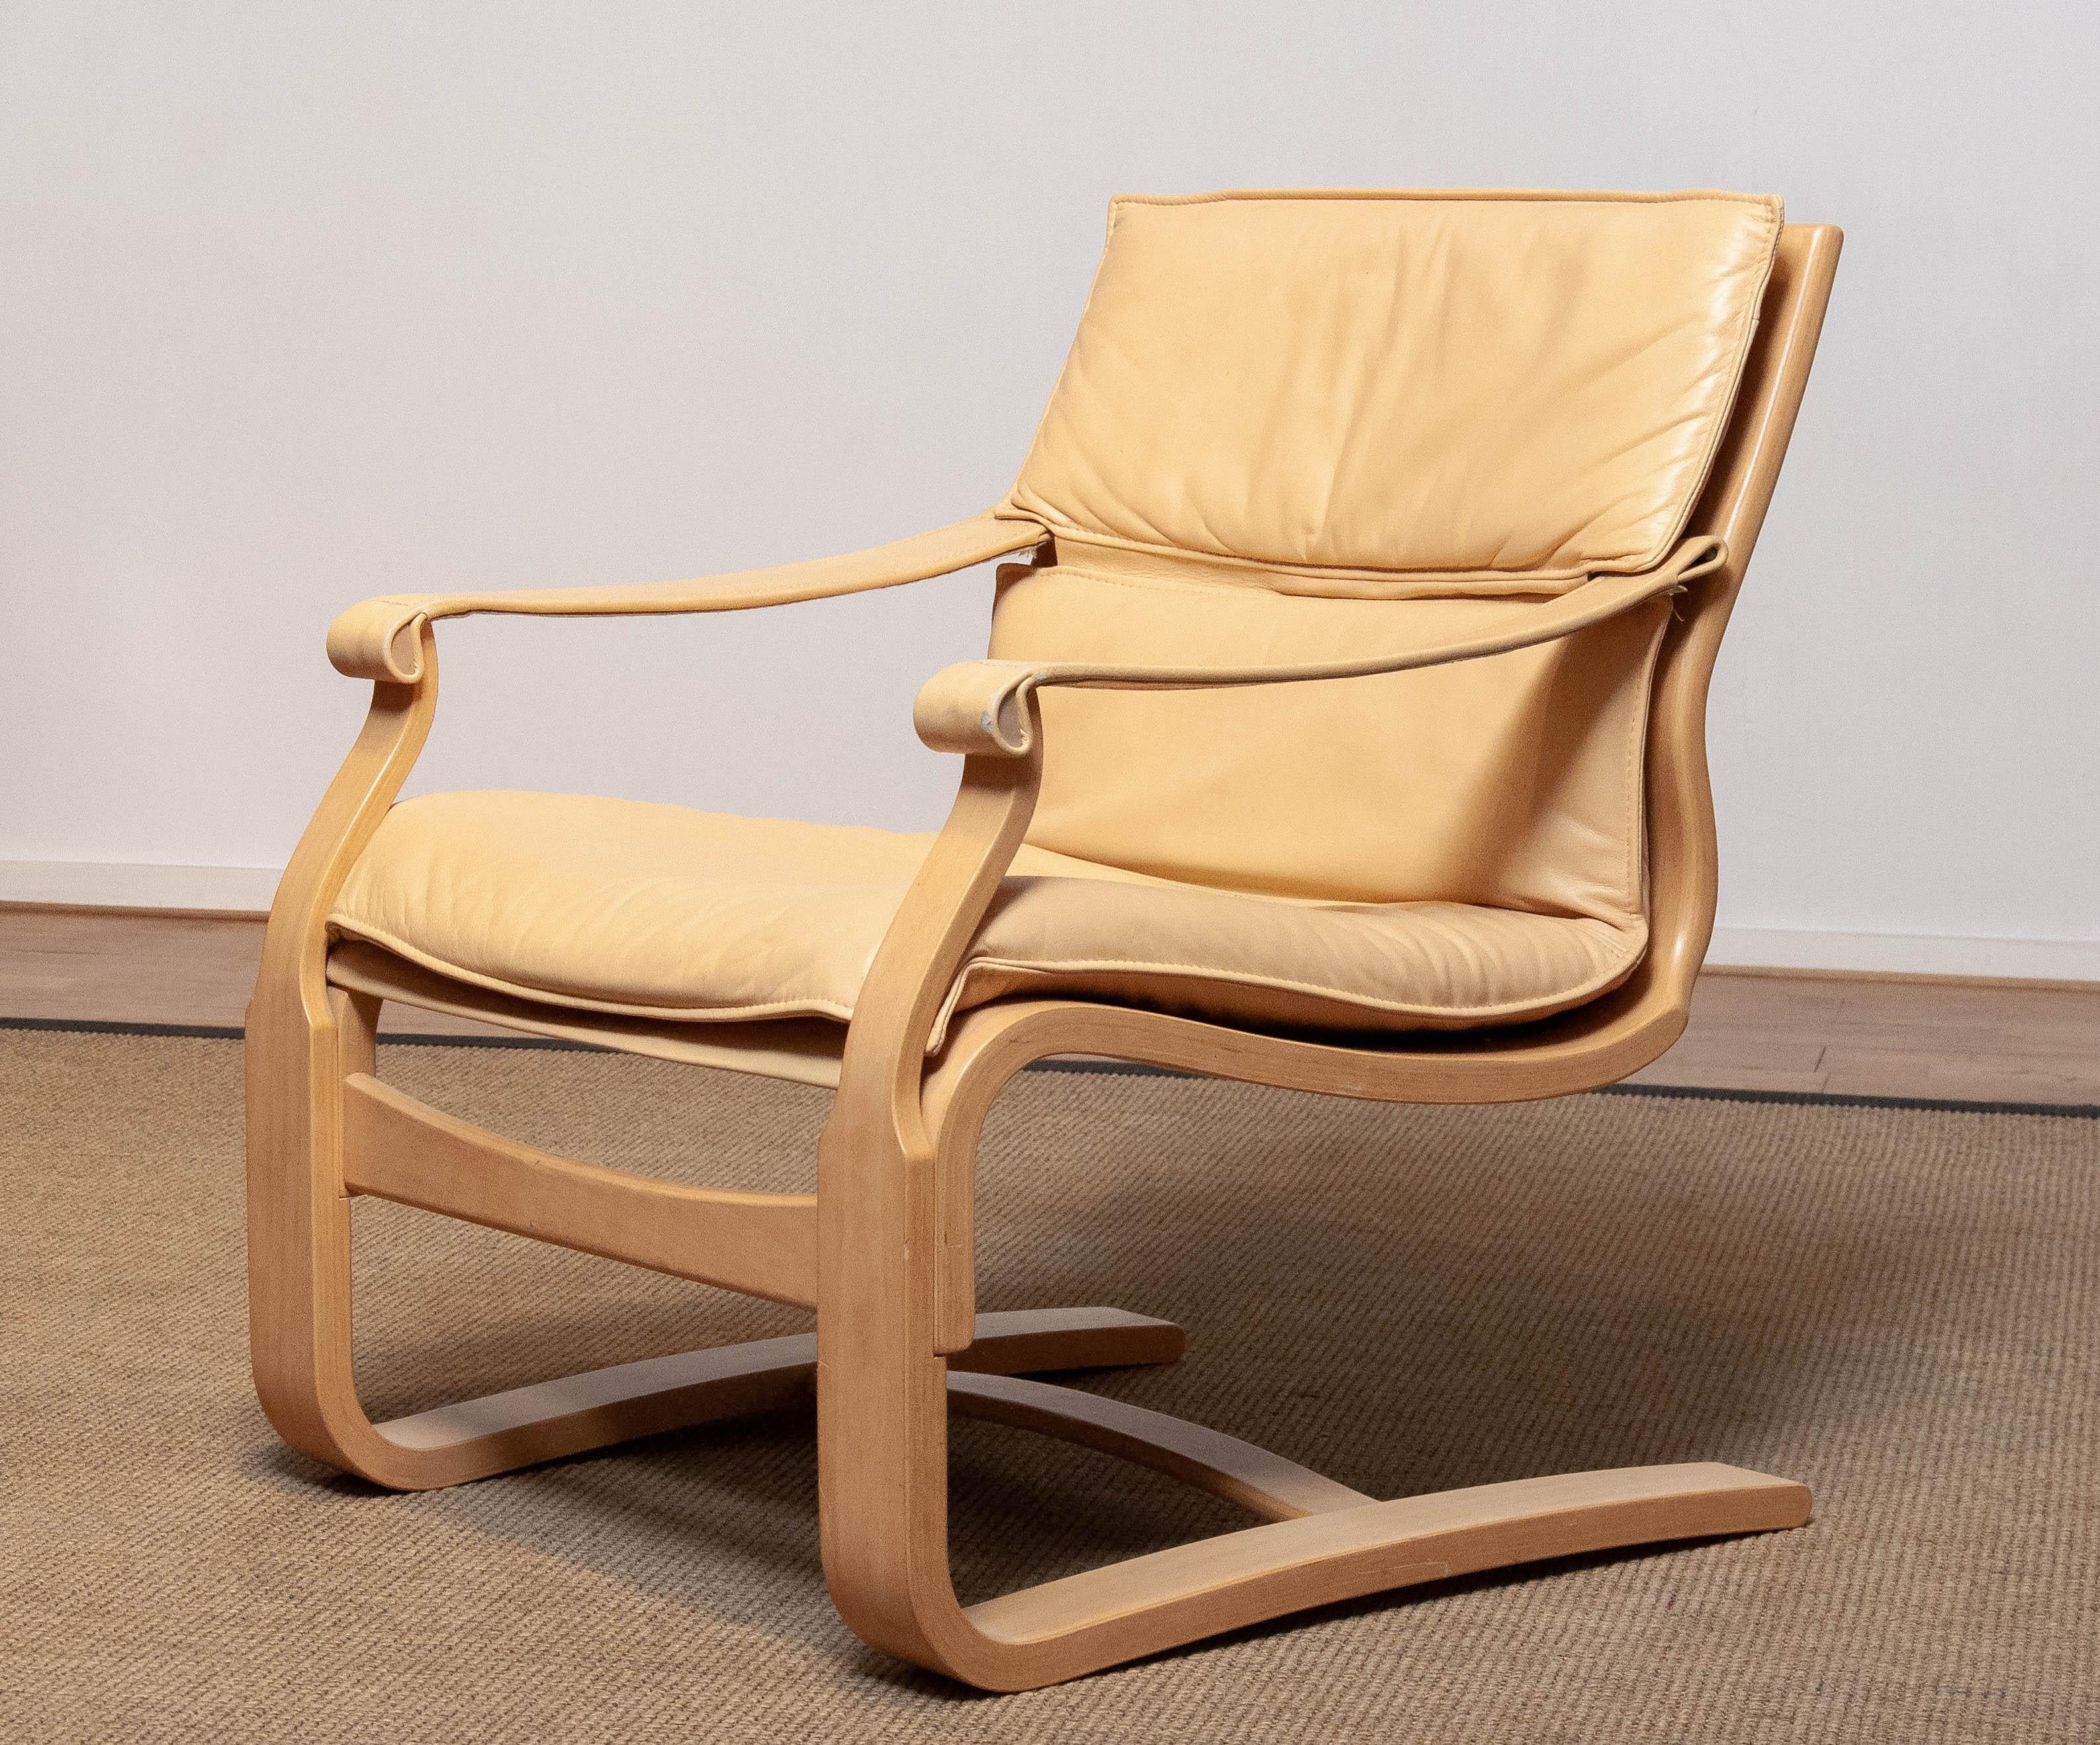 Bentwood with Beige / Creme Leather Lounge Easy Chair by Ake Fribytter for Nelo In Good Condition For Sale In Silvolde, Gelderland